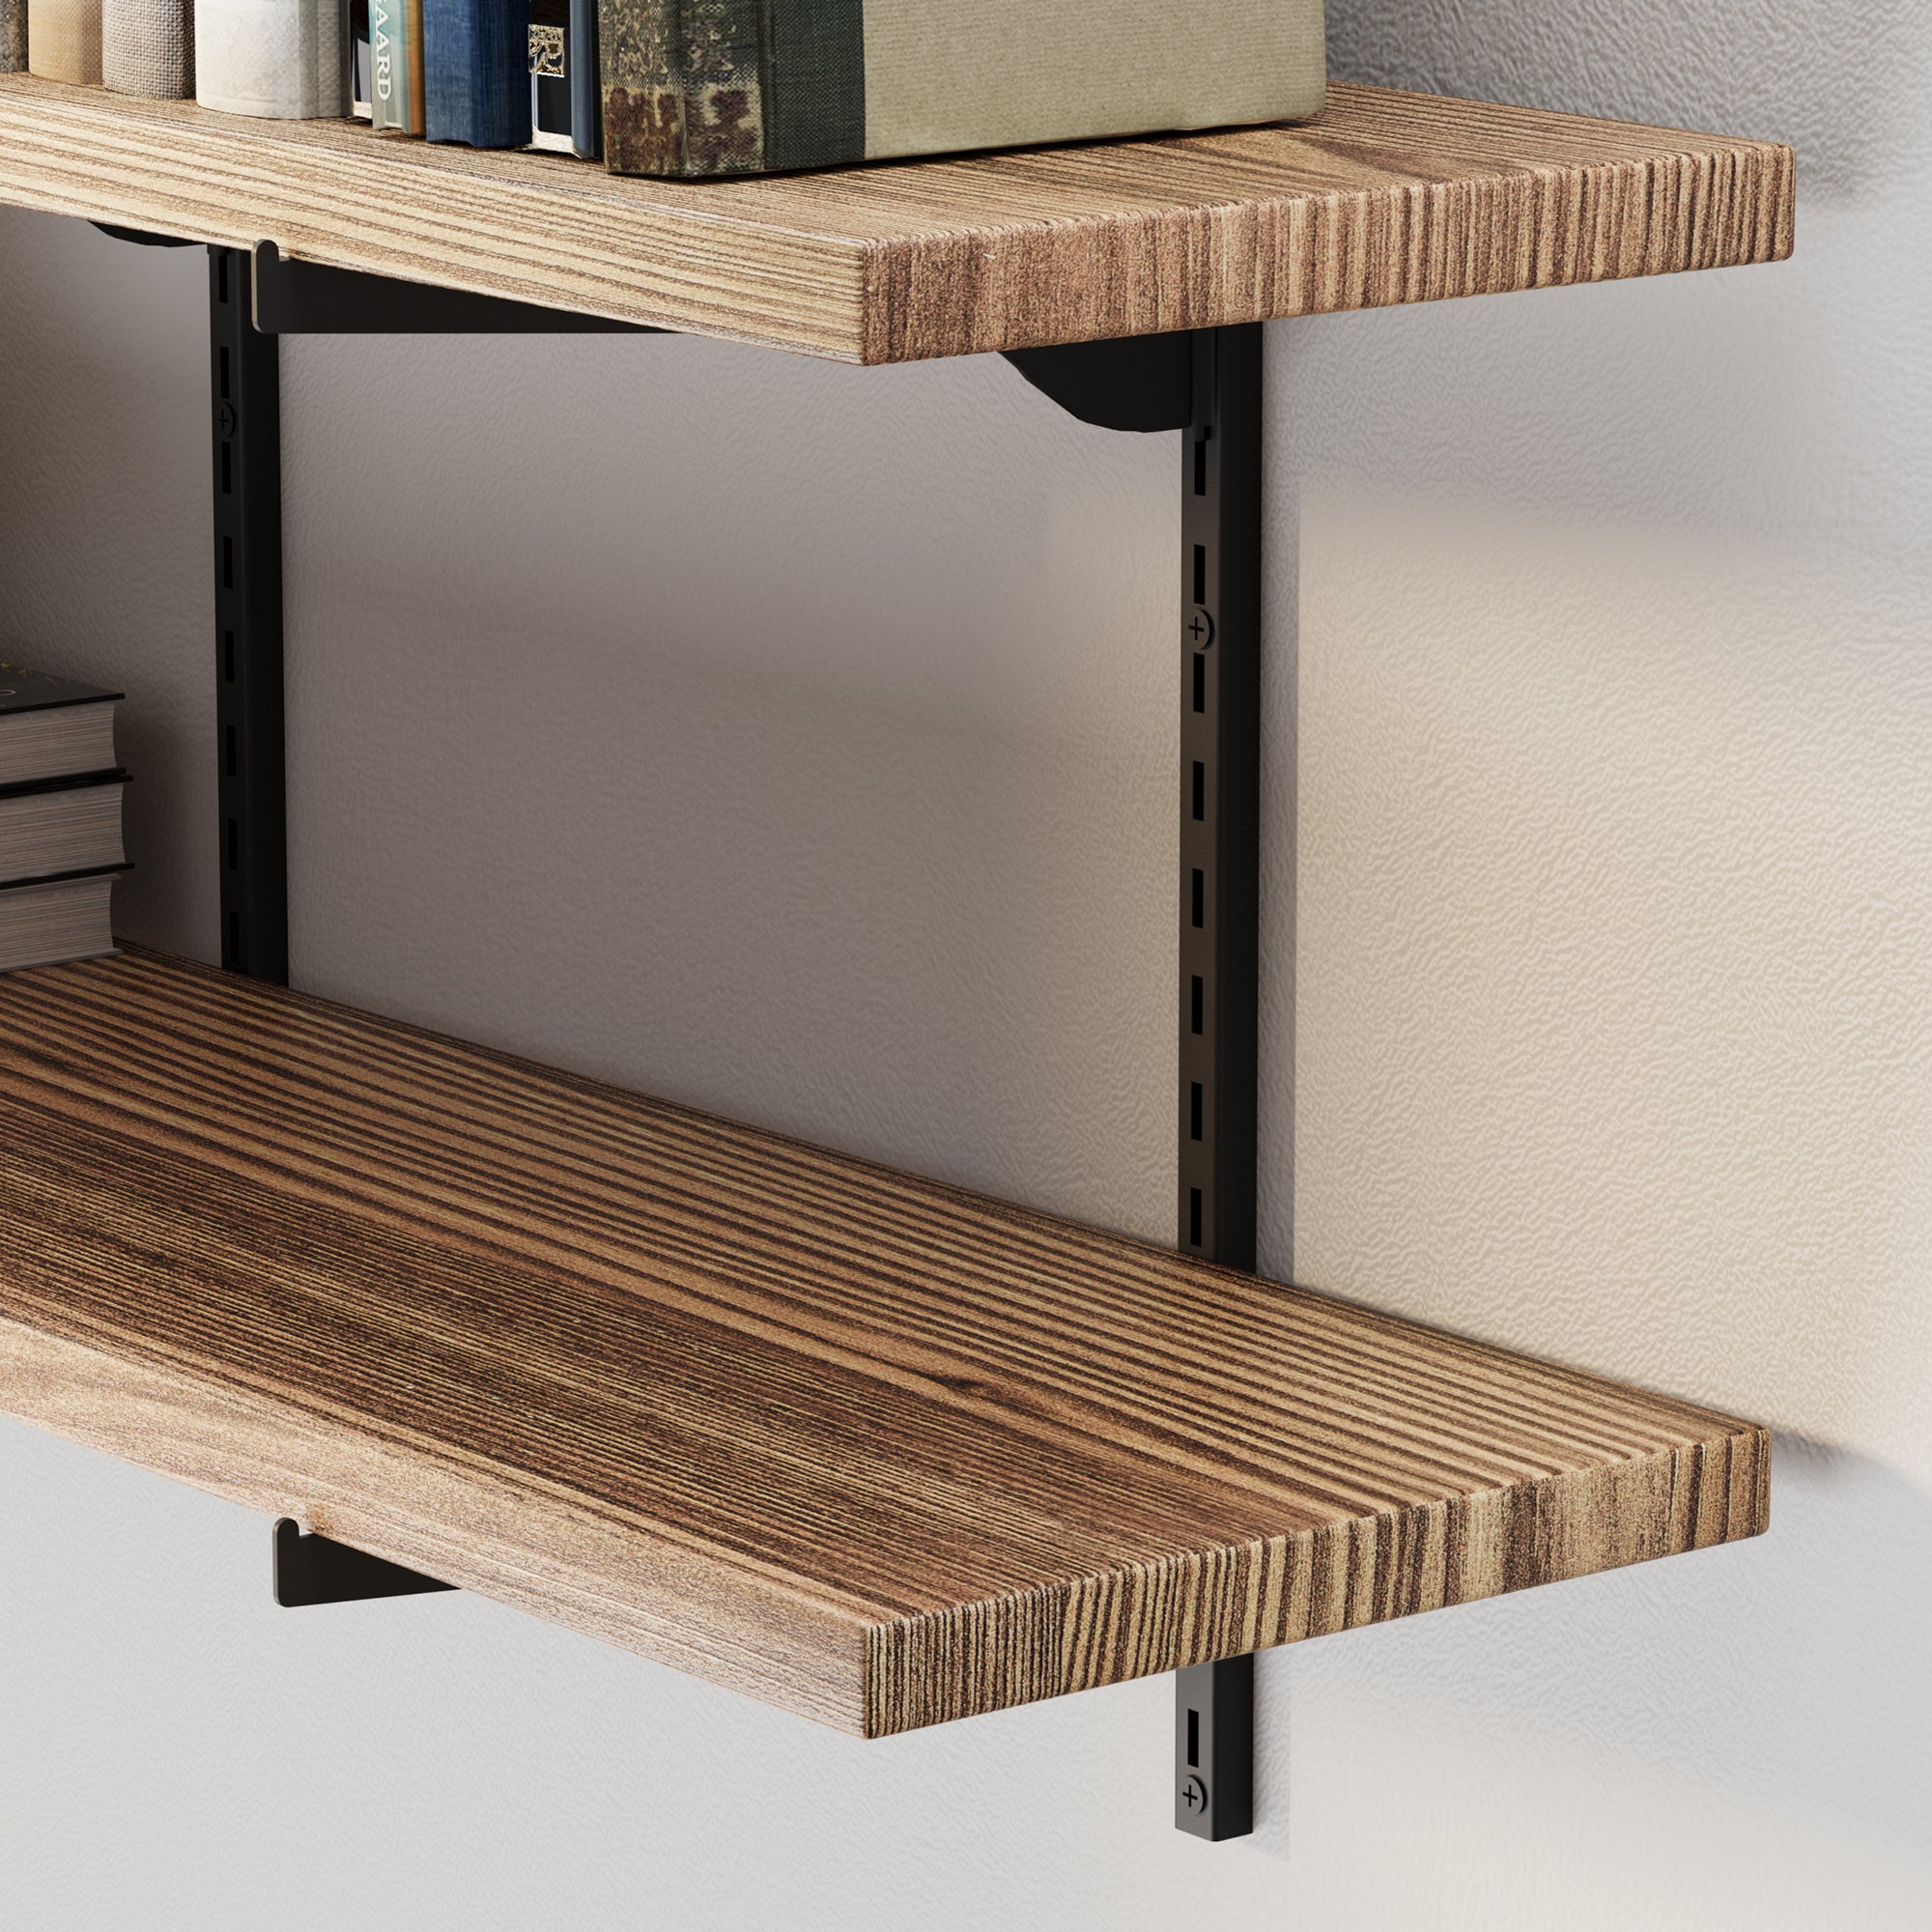 Close-up of a 2 tier shelf with black metal brackets, holding a few books and placed above another empty wall shelf.